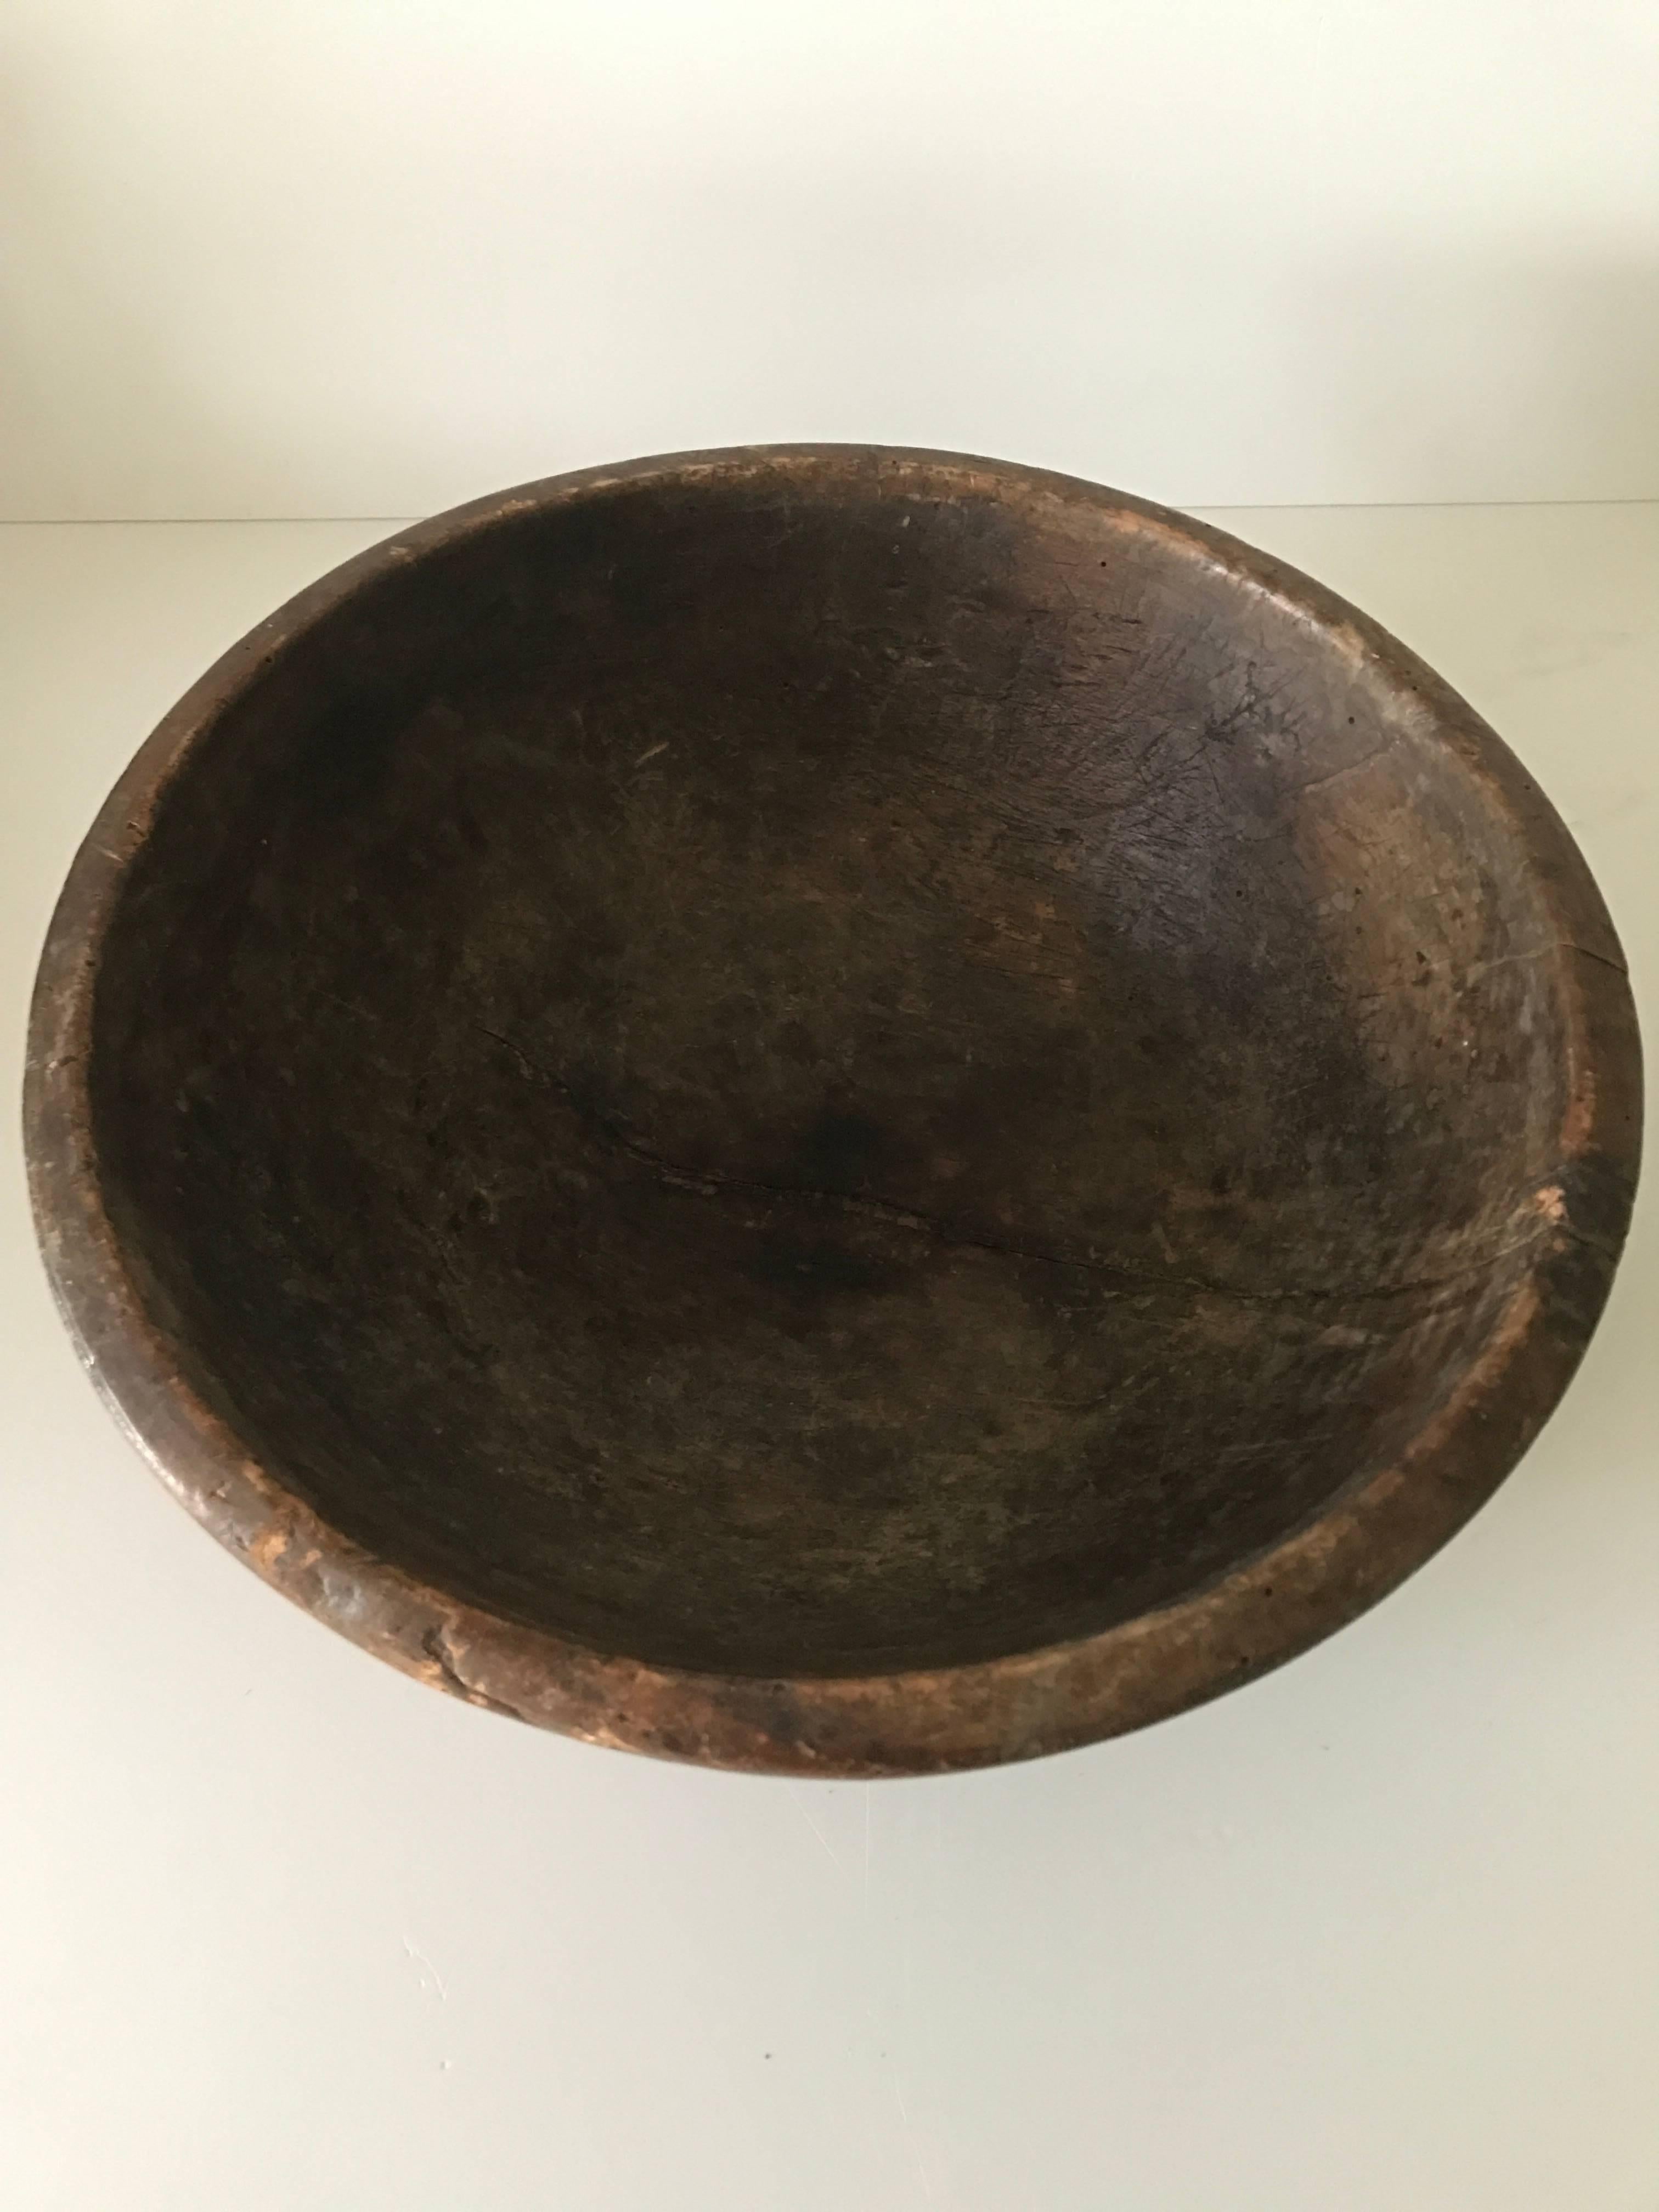 18th-19th century large Swedish wooden bowl with fantastic patina.
A beautiful and rare centrepiece to place on the sofa table or on a visible spot for display, this bowl has an outstanding nice patina. The large bowl has a diameter of 38cm and is